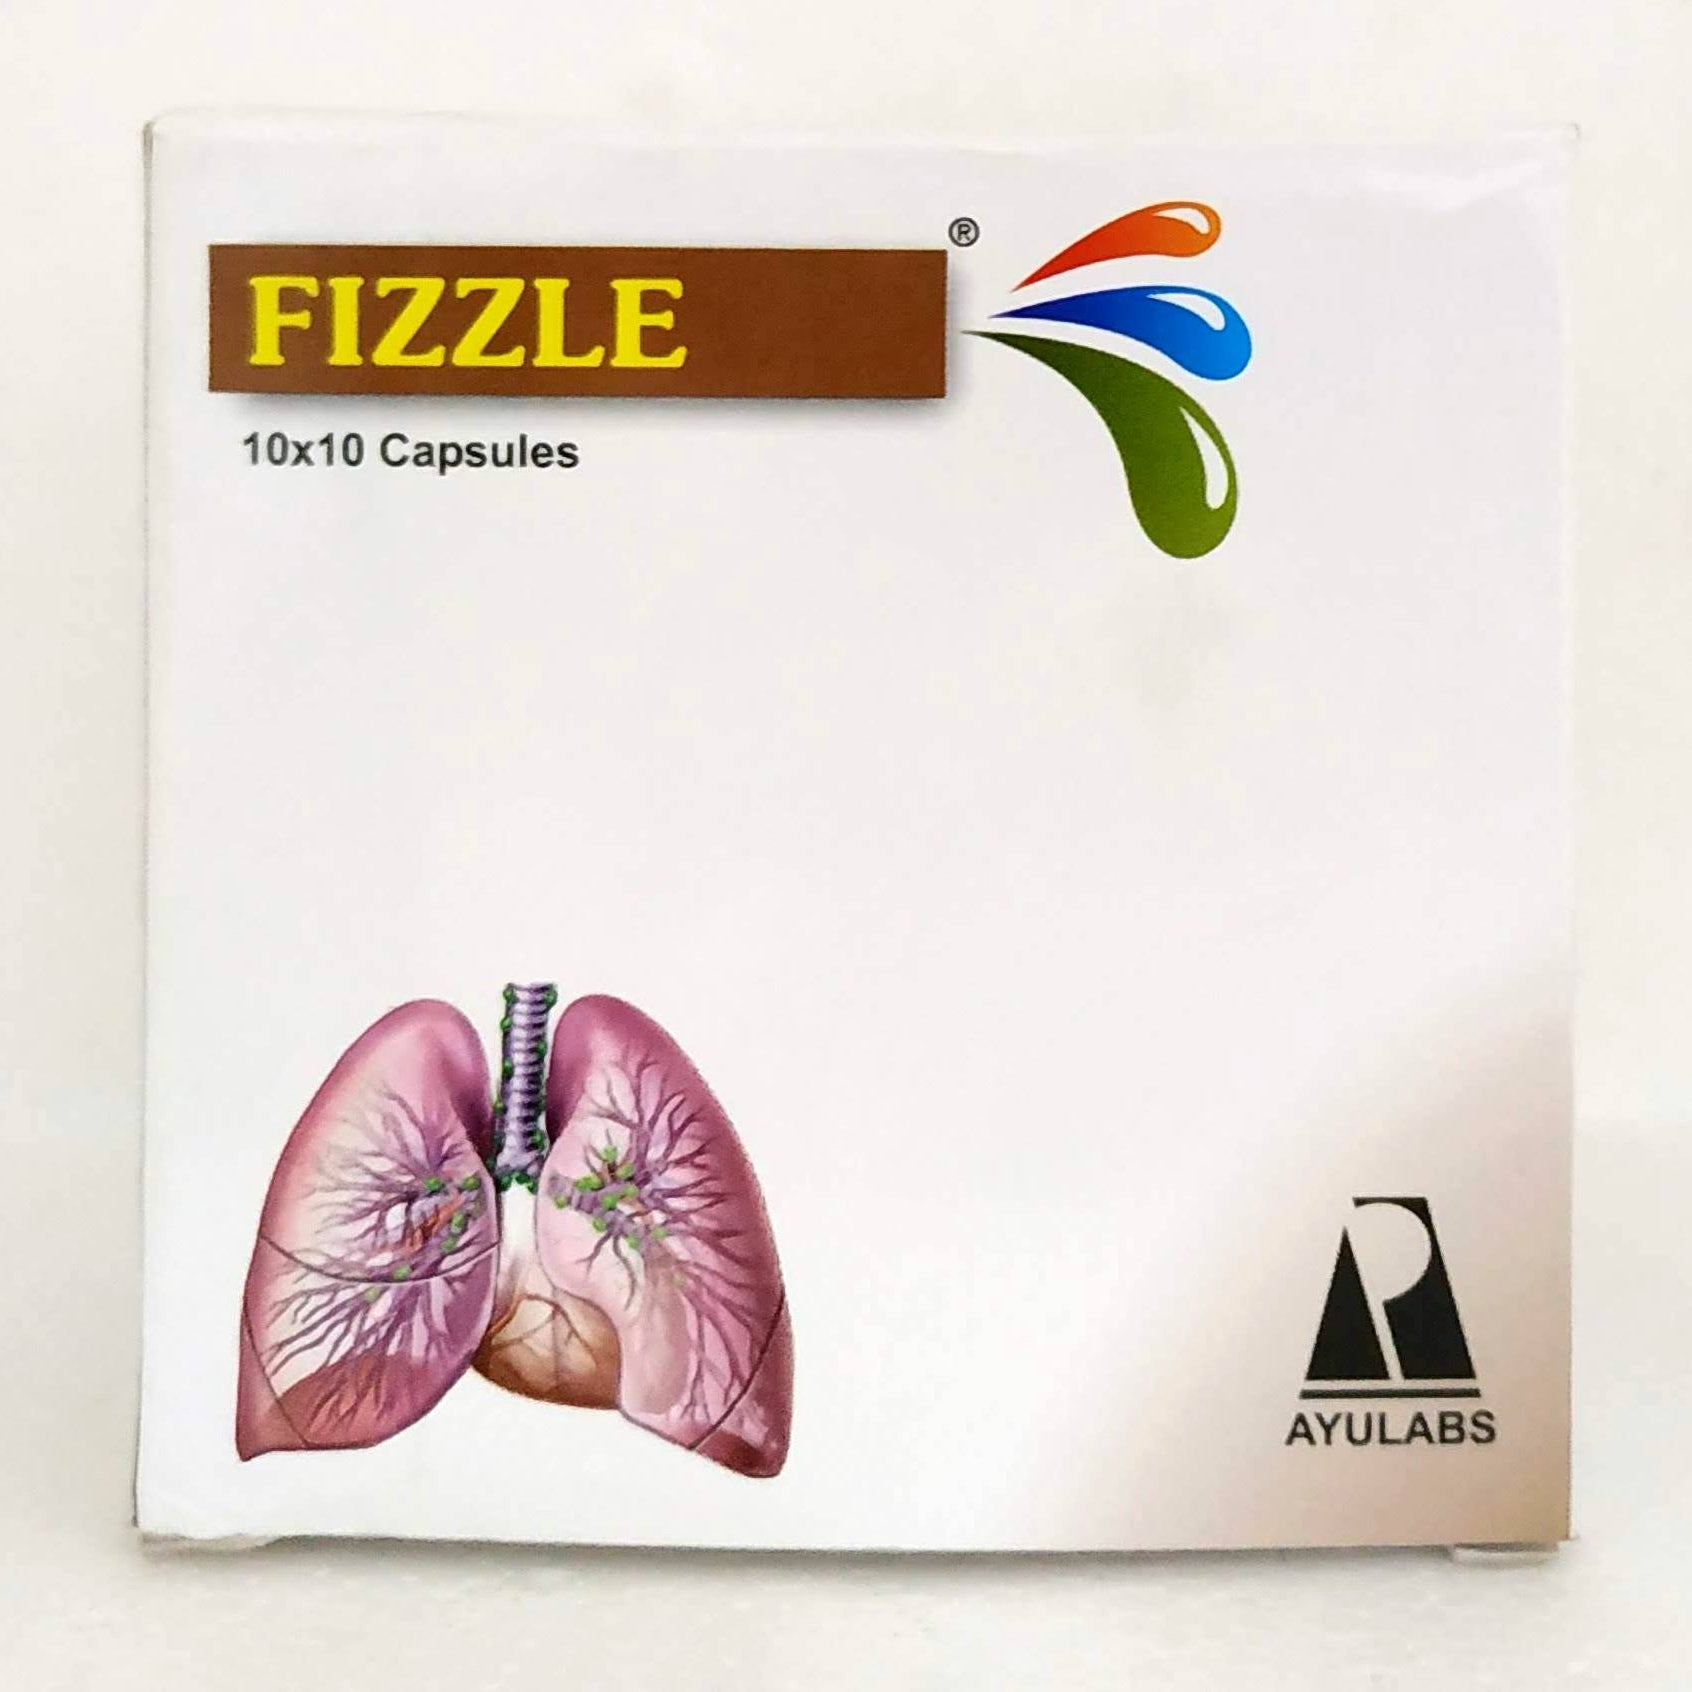 Shop Fizzle Capsules - 10Capsules at price 45.00 from Ayulabs Online - Ayush Care